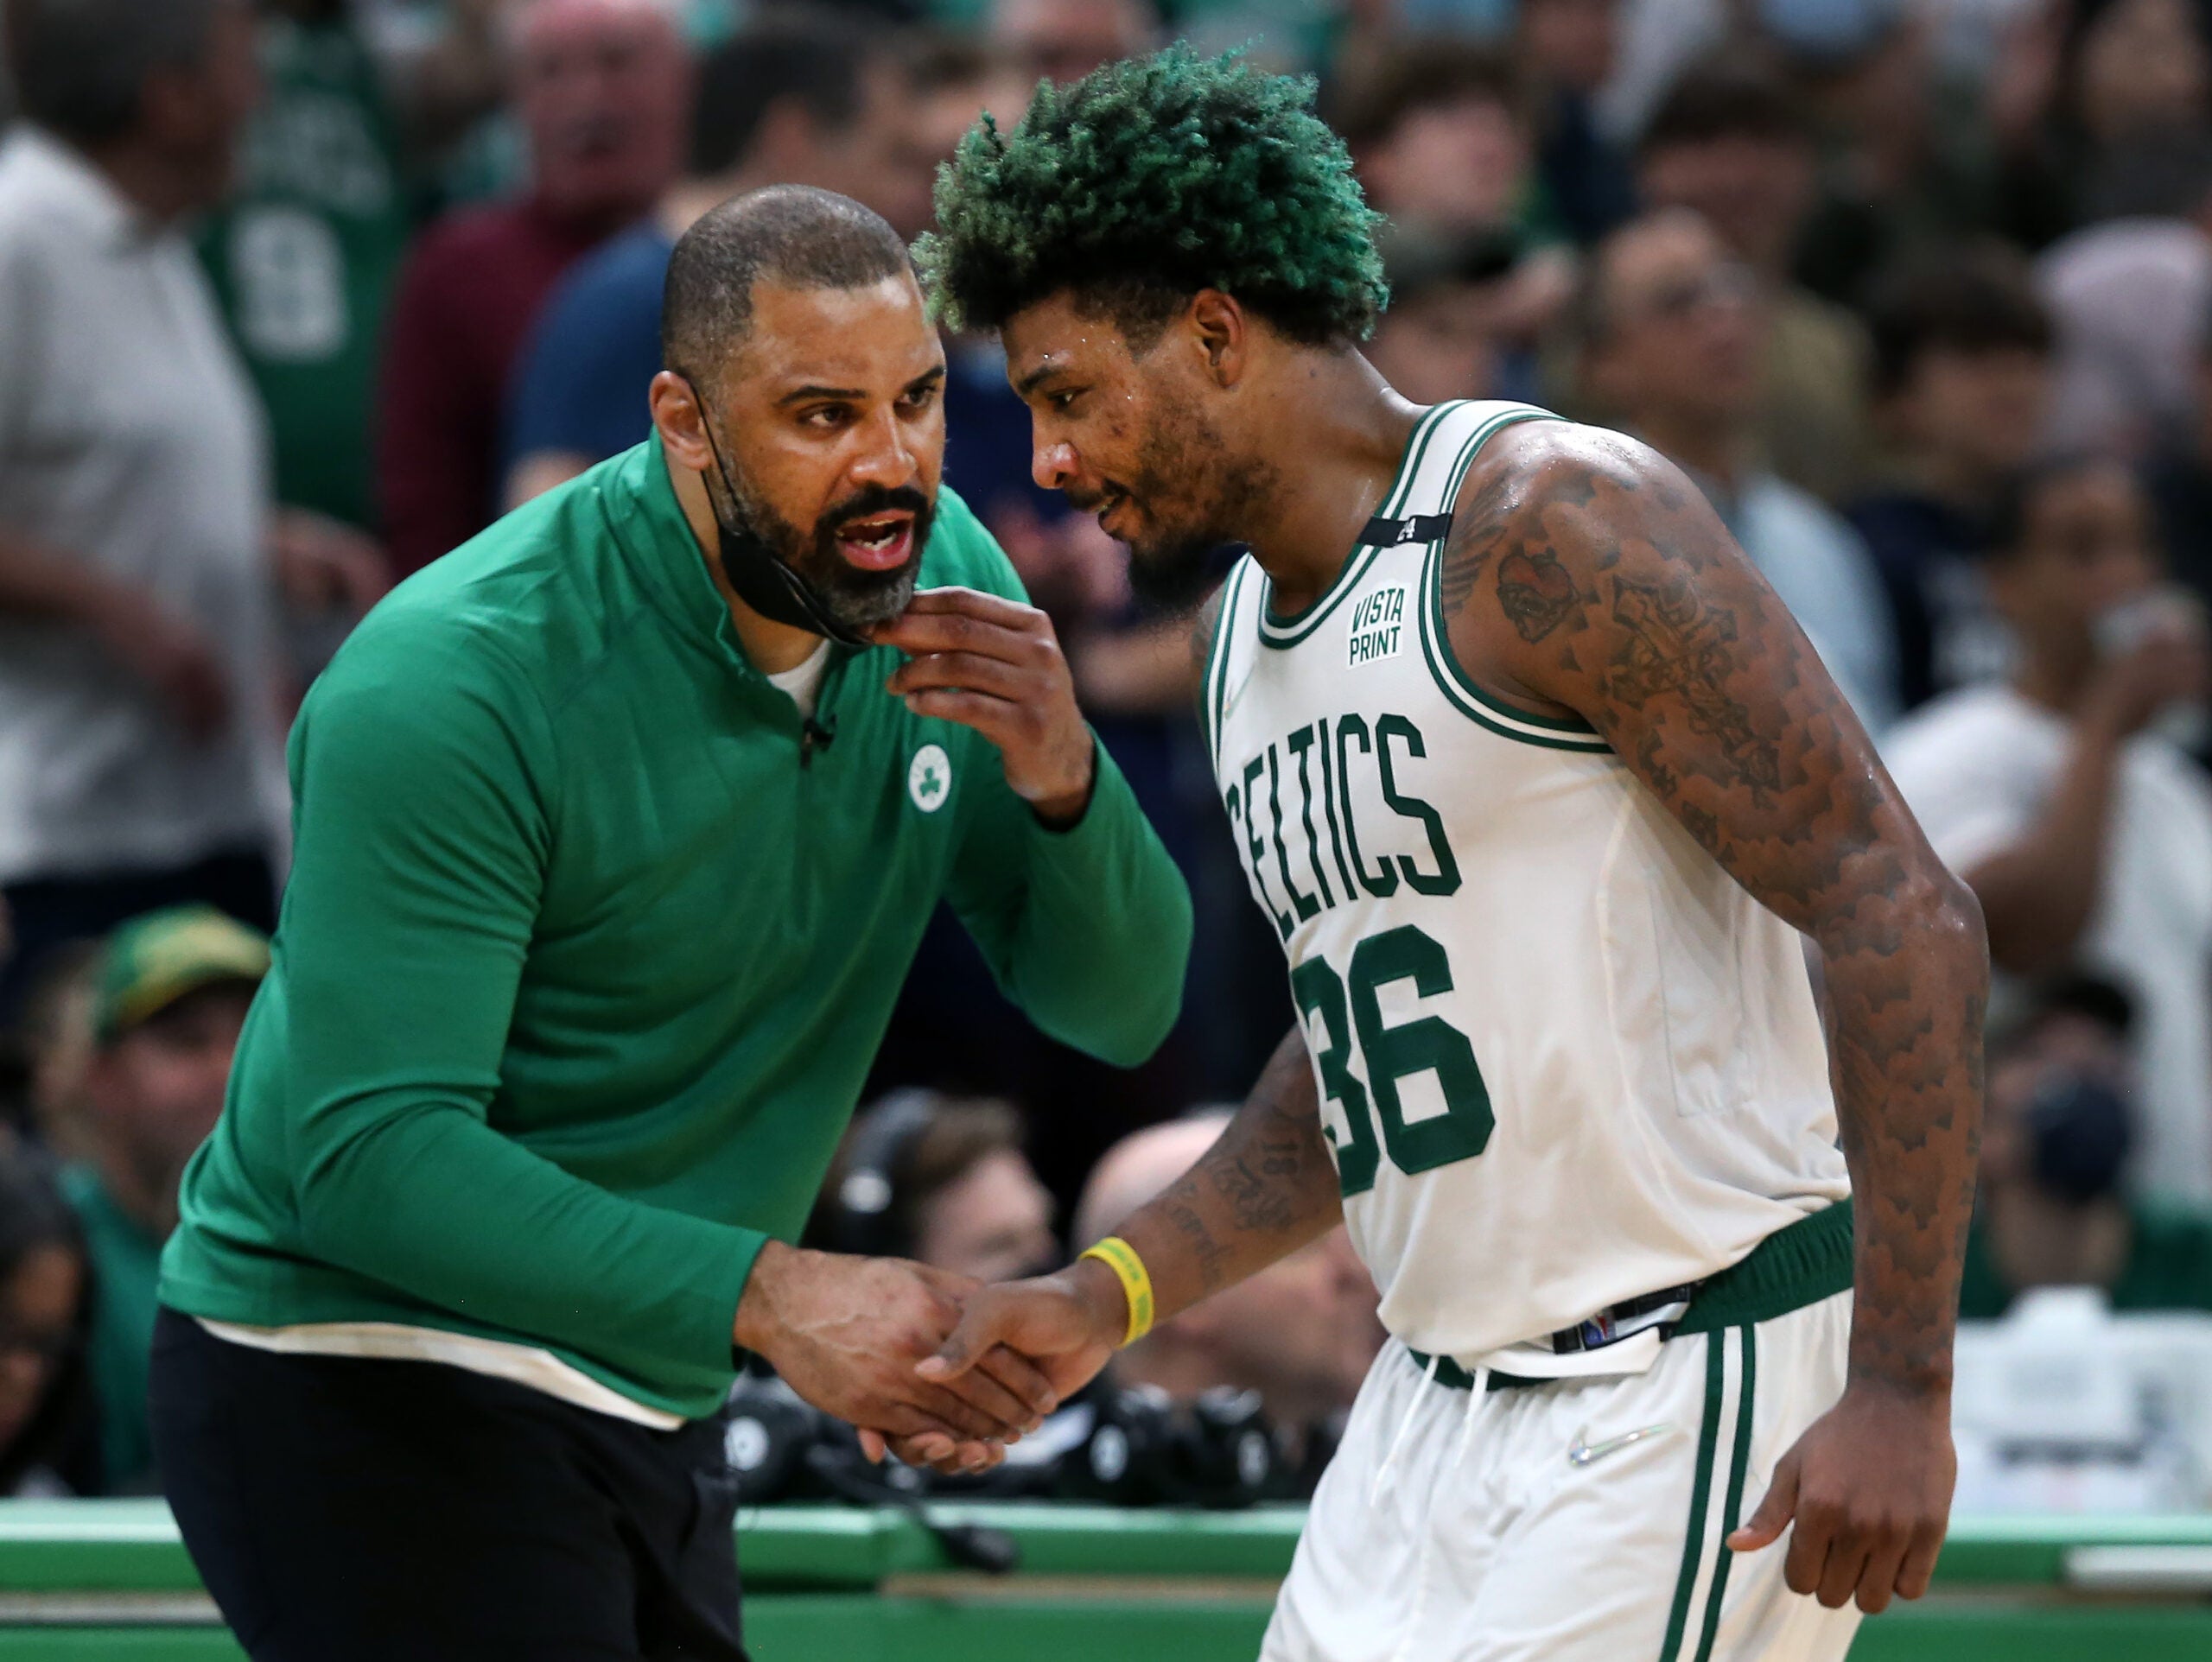 Boston, MA: 05-13-22: Celtics head coach Ime Udoka (left) has a hand for Marcus Smart (right) as he comes to the sidelines.The Boston Celtics hosted the Milwaukee Bucks for Game Seven of their NBA basketball Eastern Conference Semi-Final Playoff series at the TD Garden.